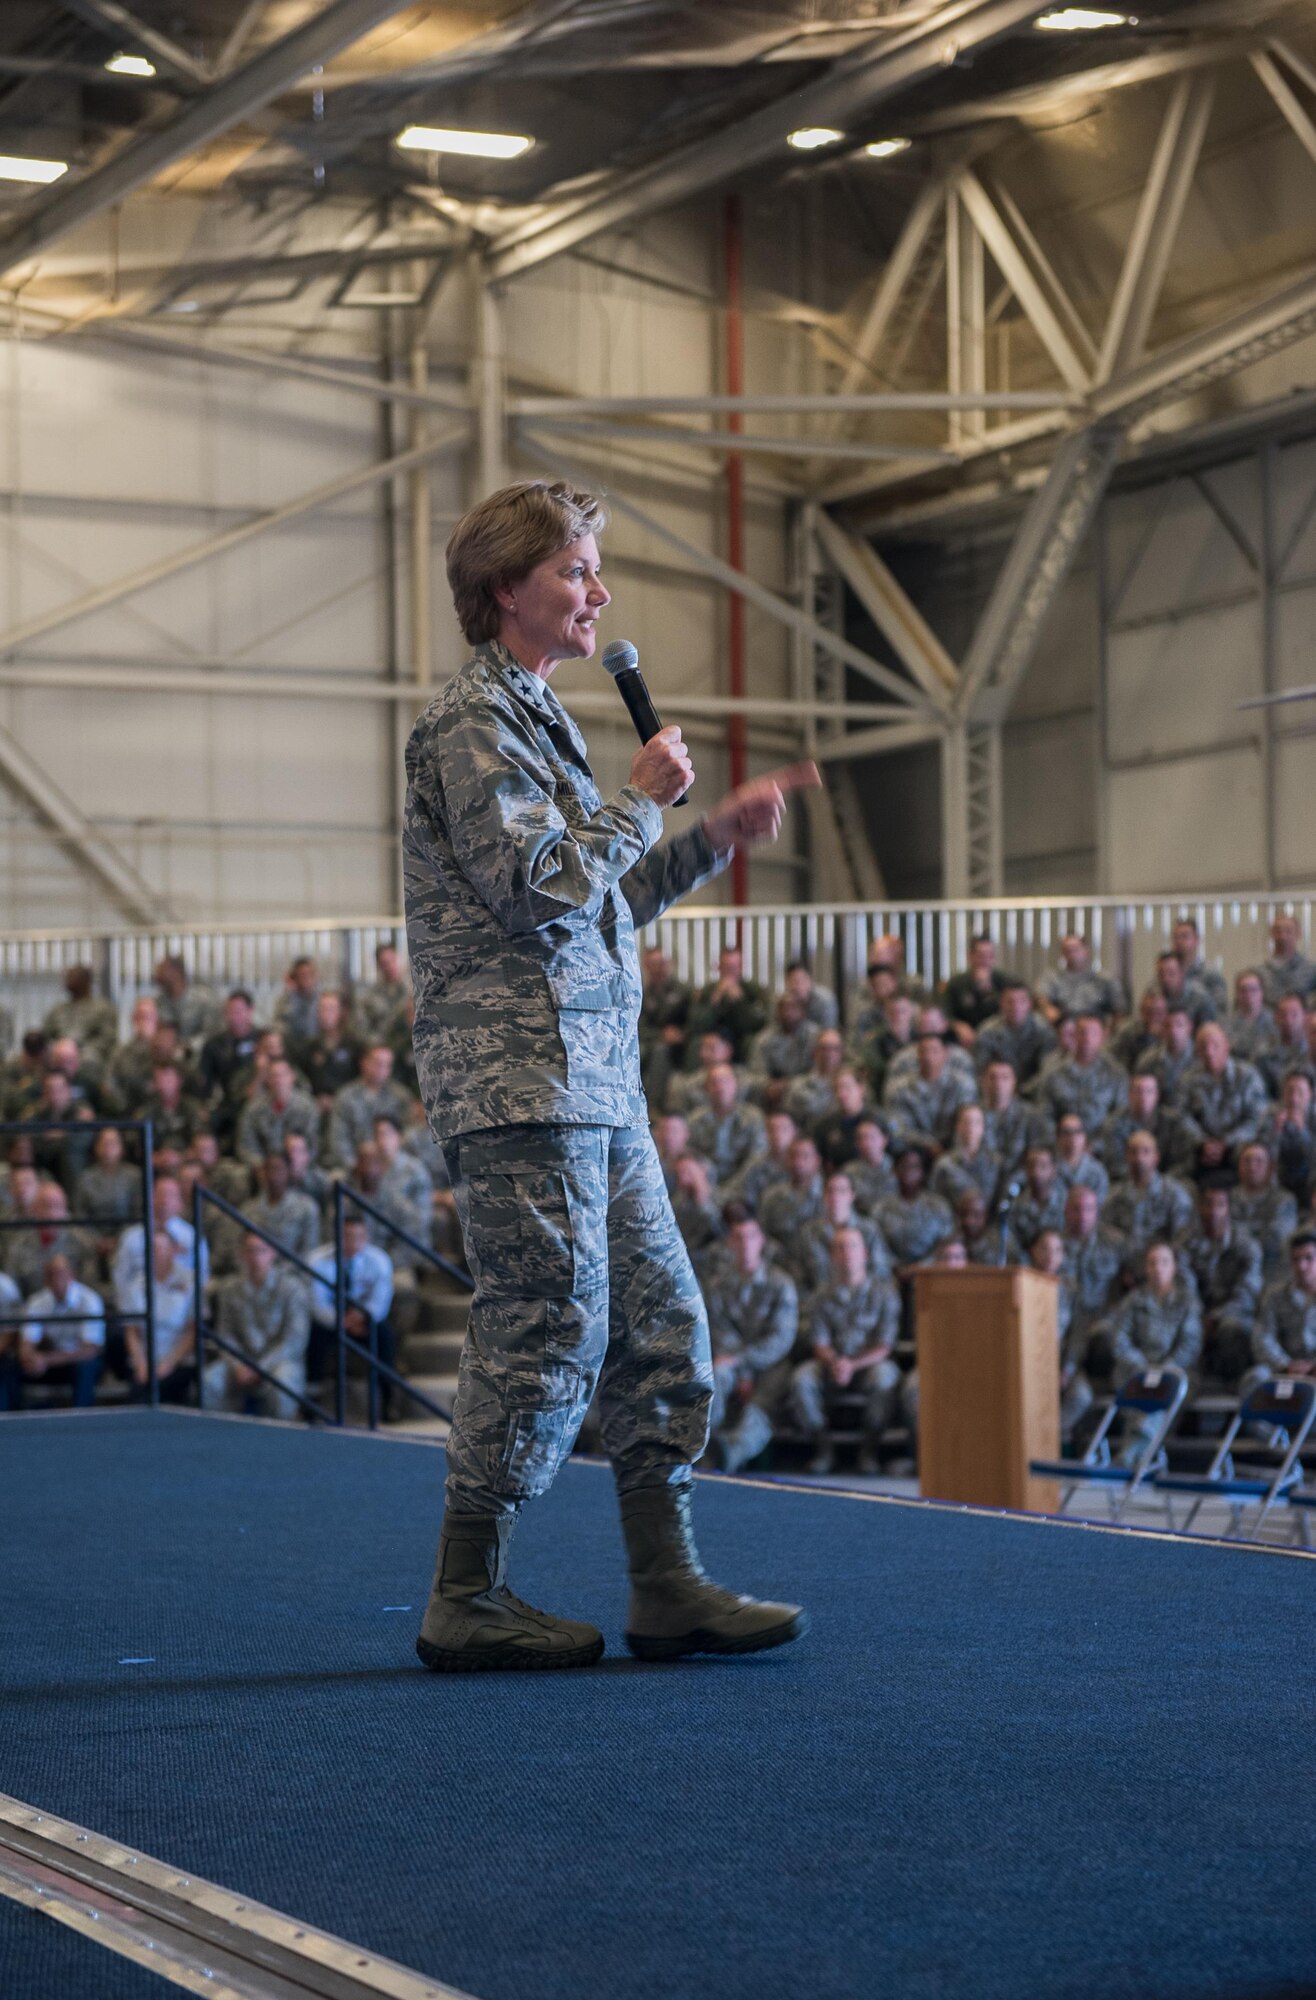 Lt. Gen. Maryanne Miller, Air Force Reserve Command commander and Chief of the Air Force Reserve, speaks to reservists July 15, 2017, at Beale Air Force Base, California. Miller held an all-ranks all-call to speak with Reserve Citizen Airmen and offer a question and answer period. (U.S. Air Force photo by Staff Sgt. Brenda Davis)